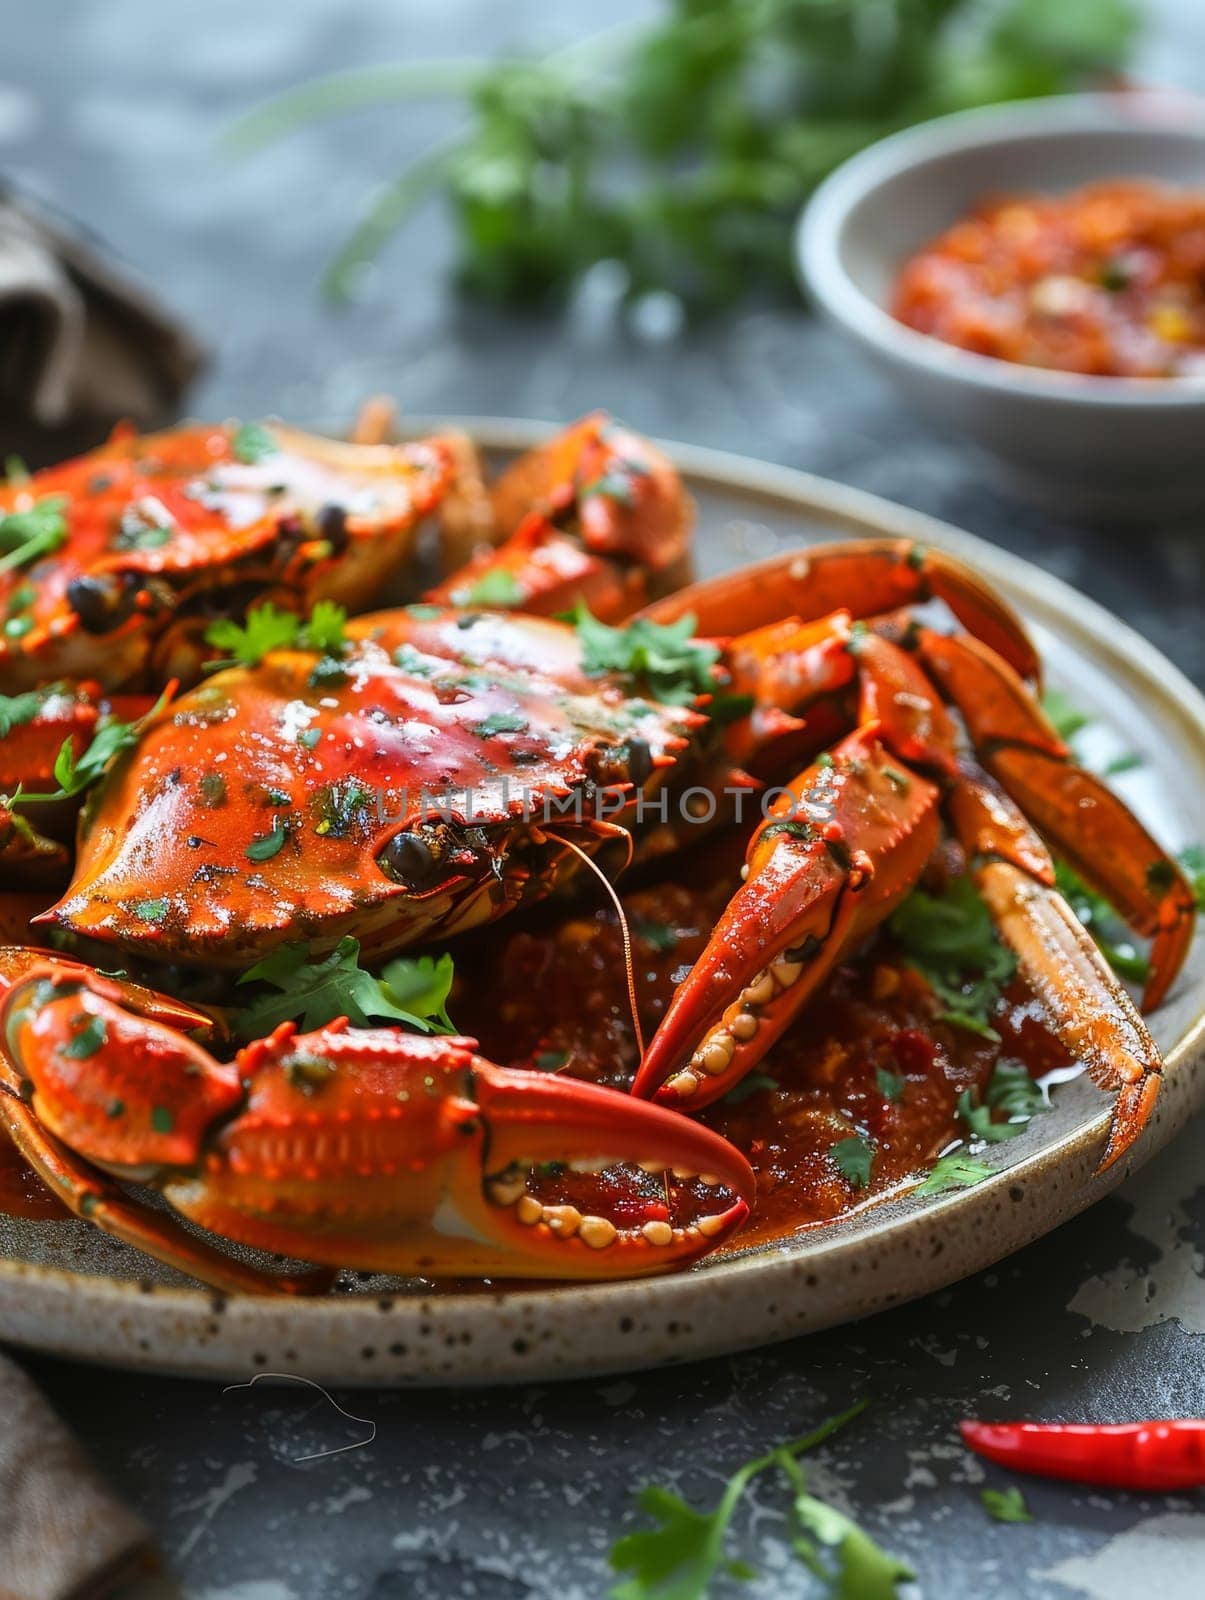 Singaporean chili crab, a beloved regional delicacy, served piping hot on a plate with a vibrant tomato-chili dipping sauce and fresh herbs. The bold tastes of Singaporean cuisine. by sfinks